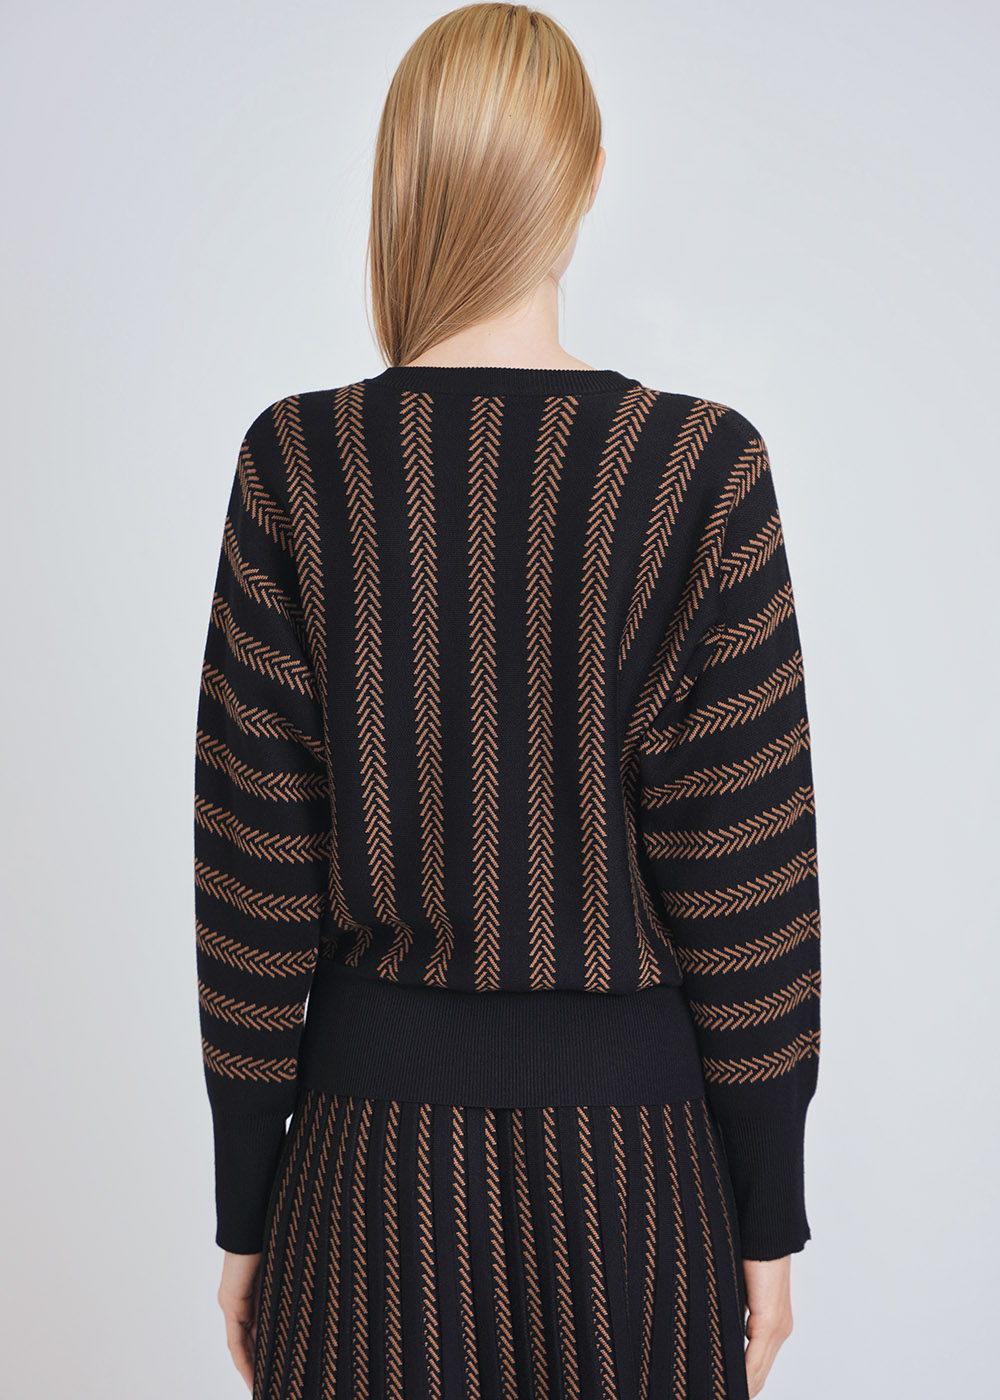 Refined Black Knit with Camel Features